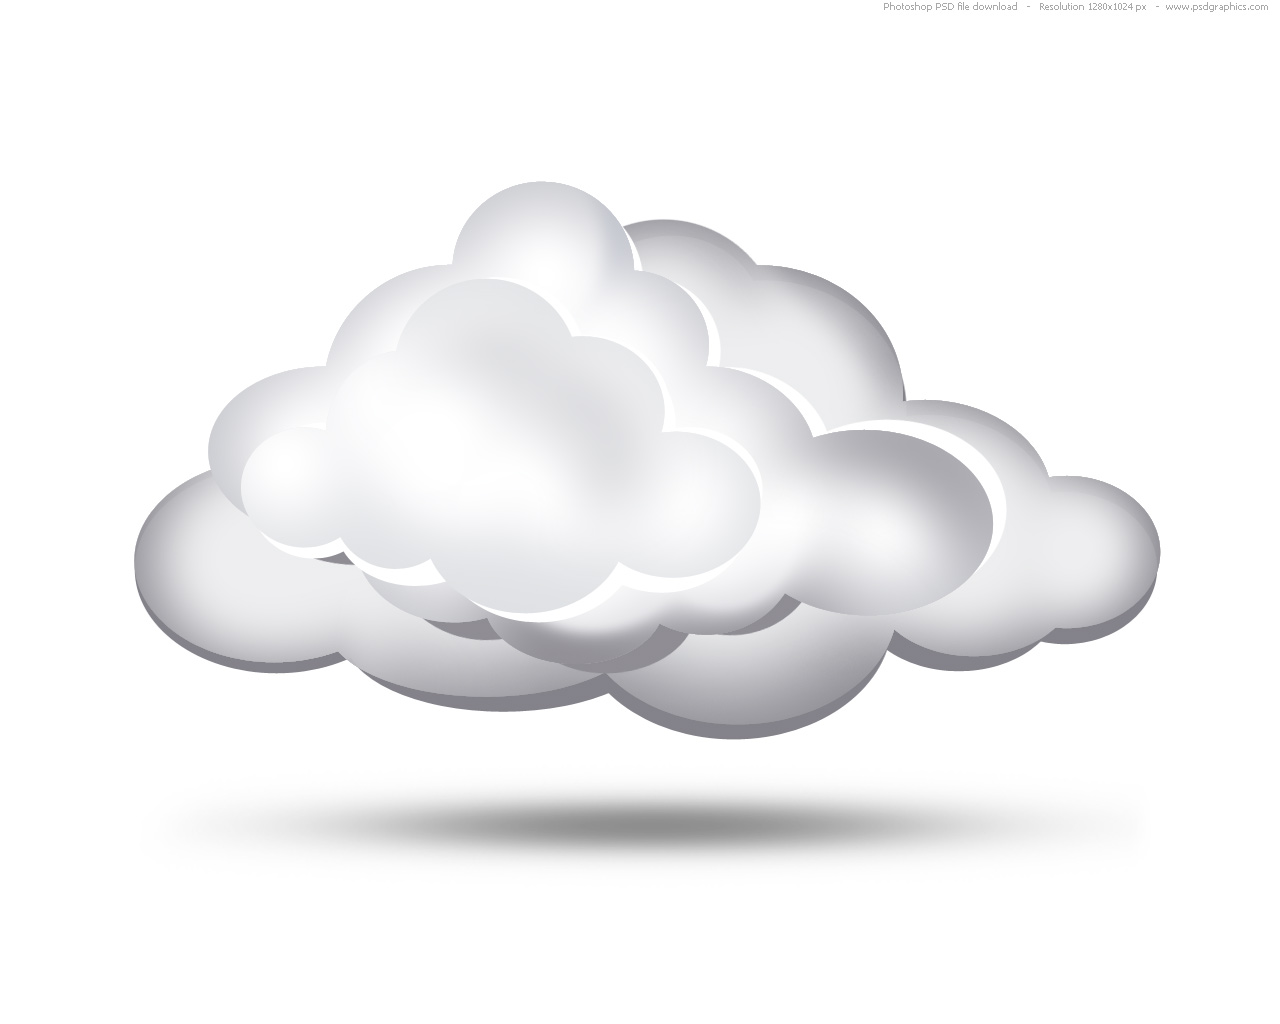 Shaped Clouds Csp15011954 Search Clip Art Illustration Drawings